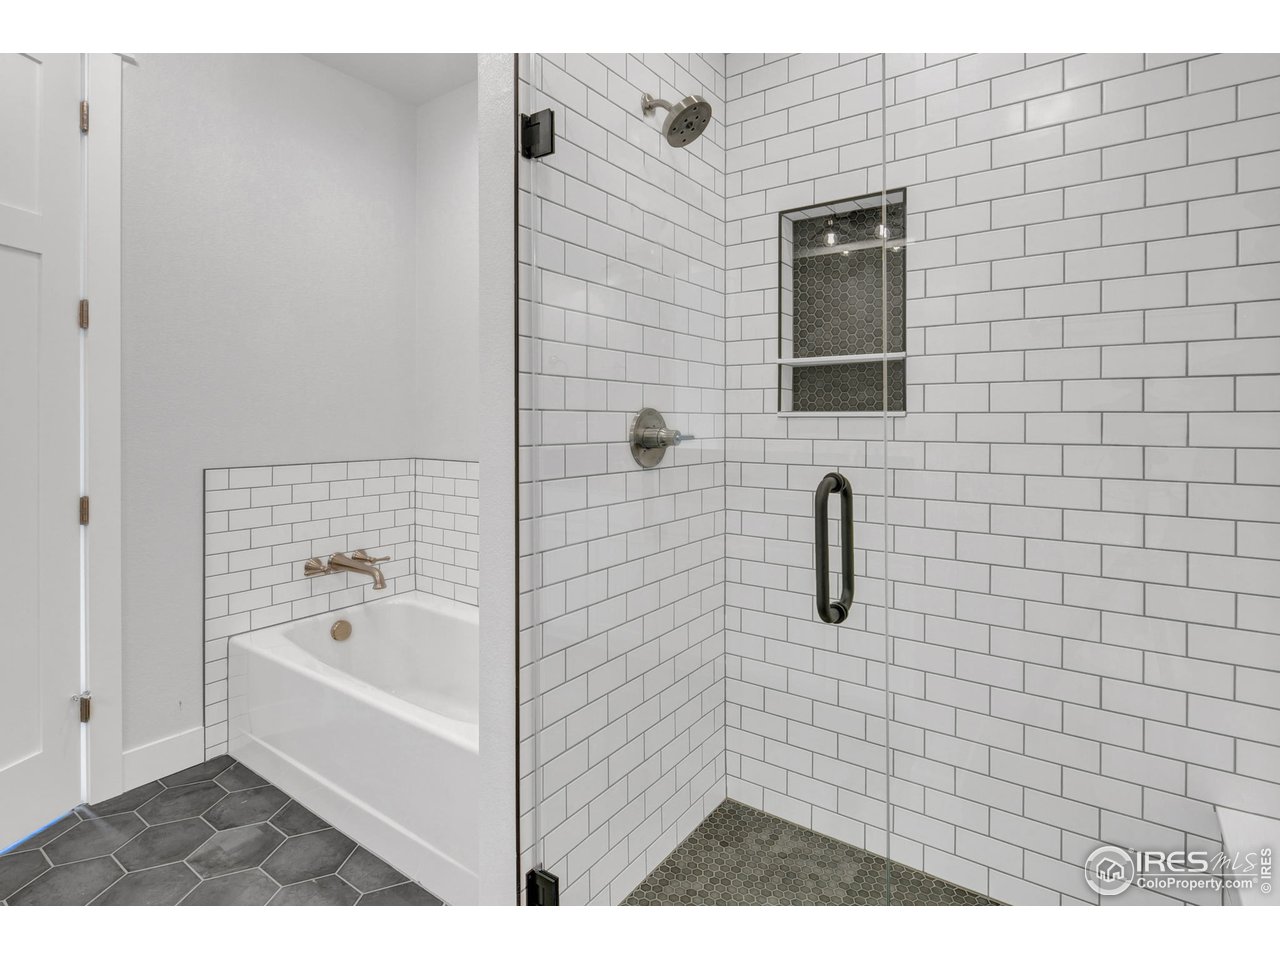 Floor to ceiling tiling in all showers, plus a soaker tub in the primary ensuite 